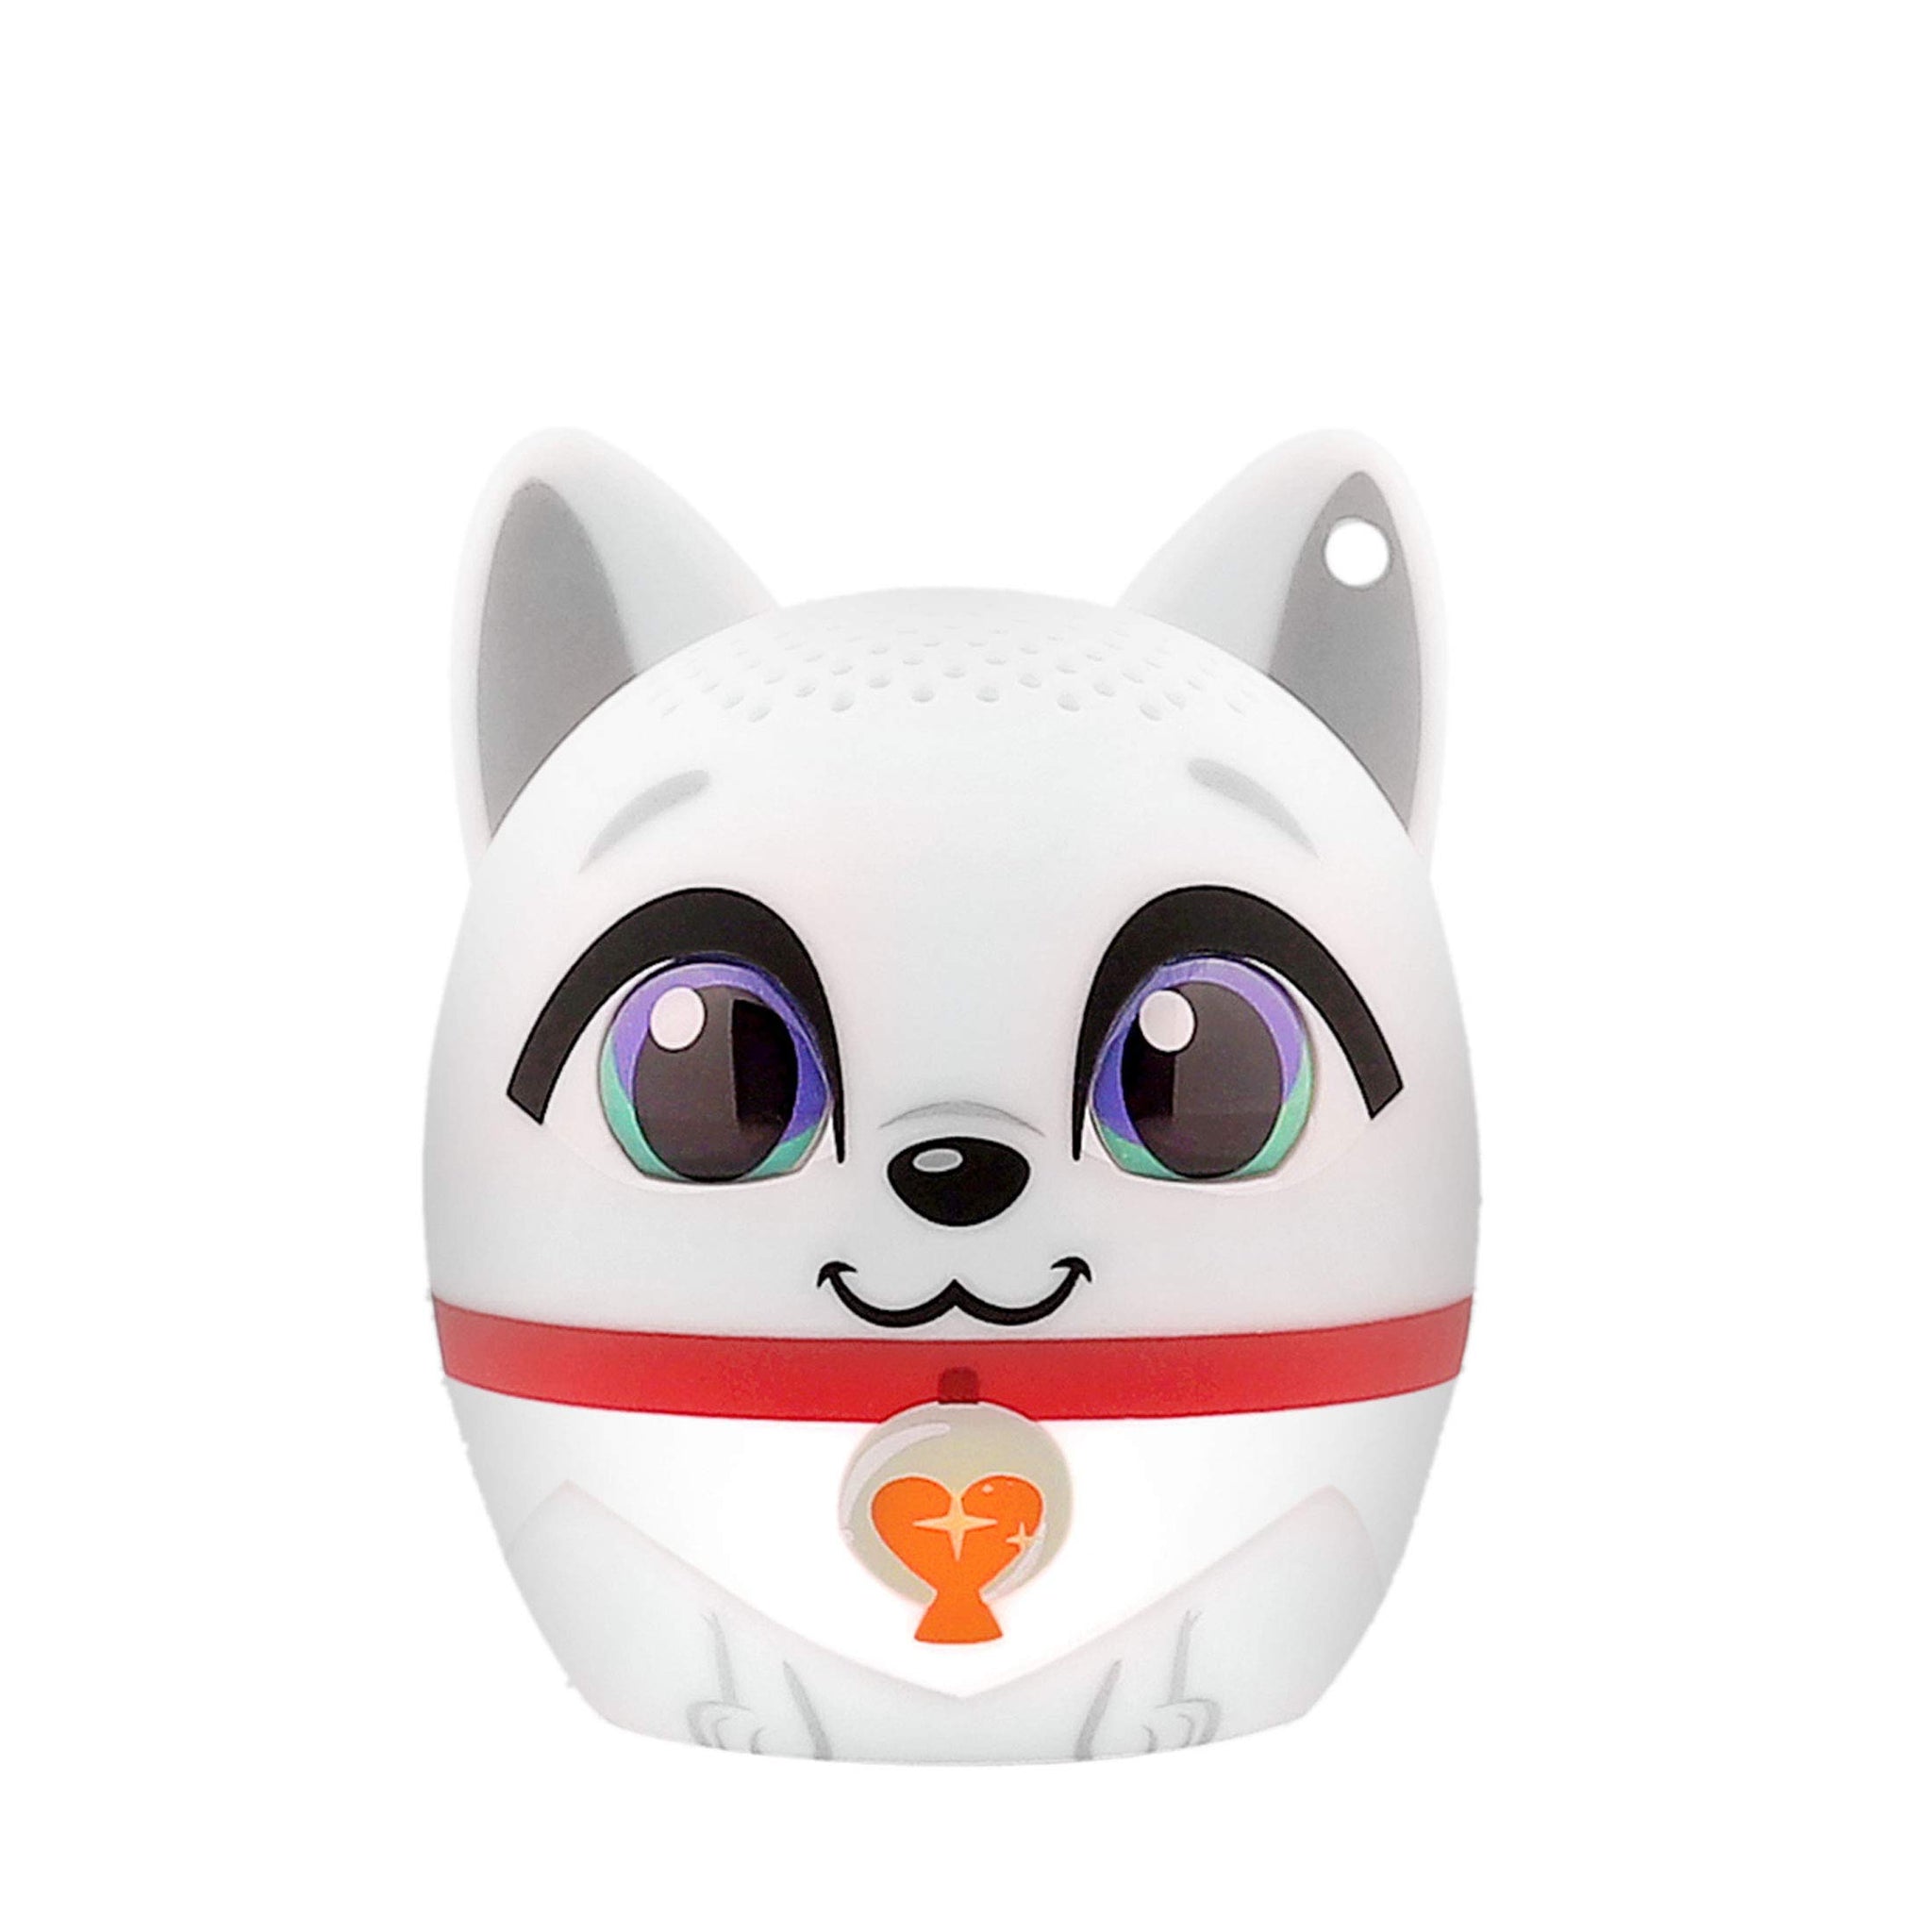 My Audio Pet Mini Bluetooth Animal Wireless Speaker - True Wireless Stereo  Pair with Another TWS Pet for Powerful Rich Room-Filling Sound - Elf on the Shelf (Arctic Fox)